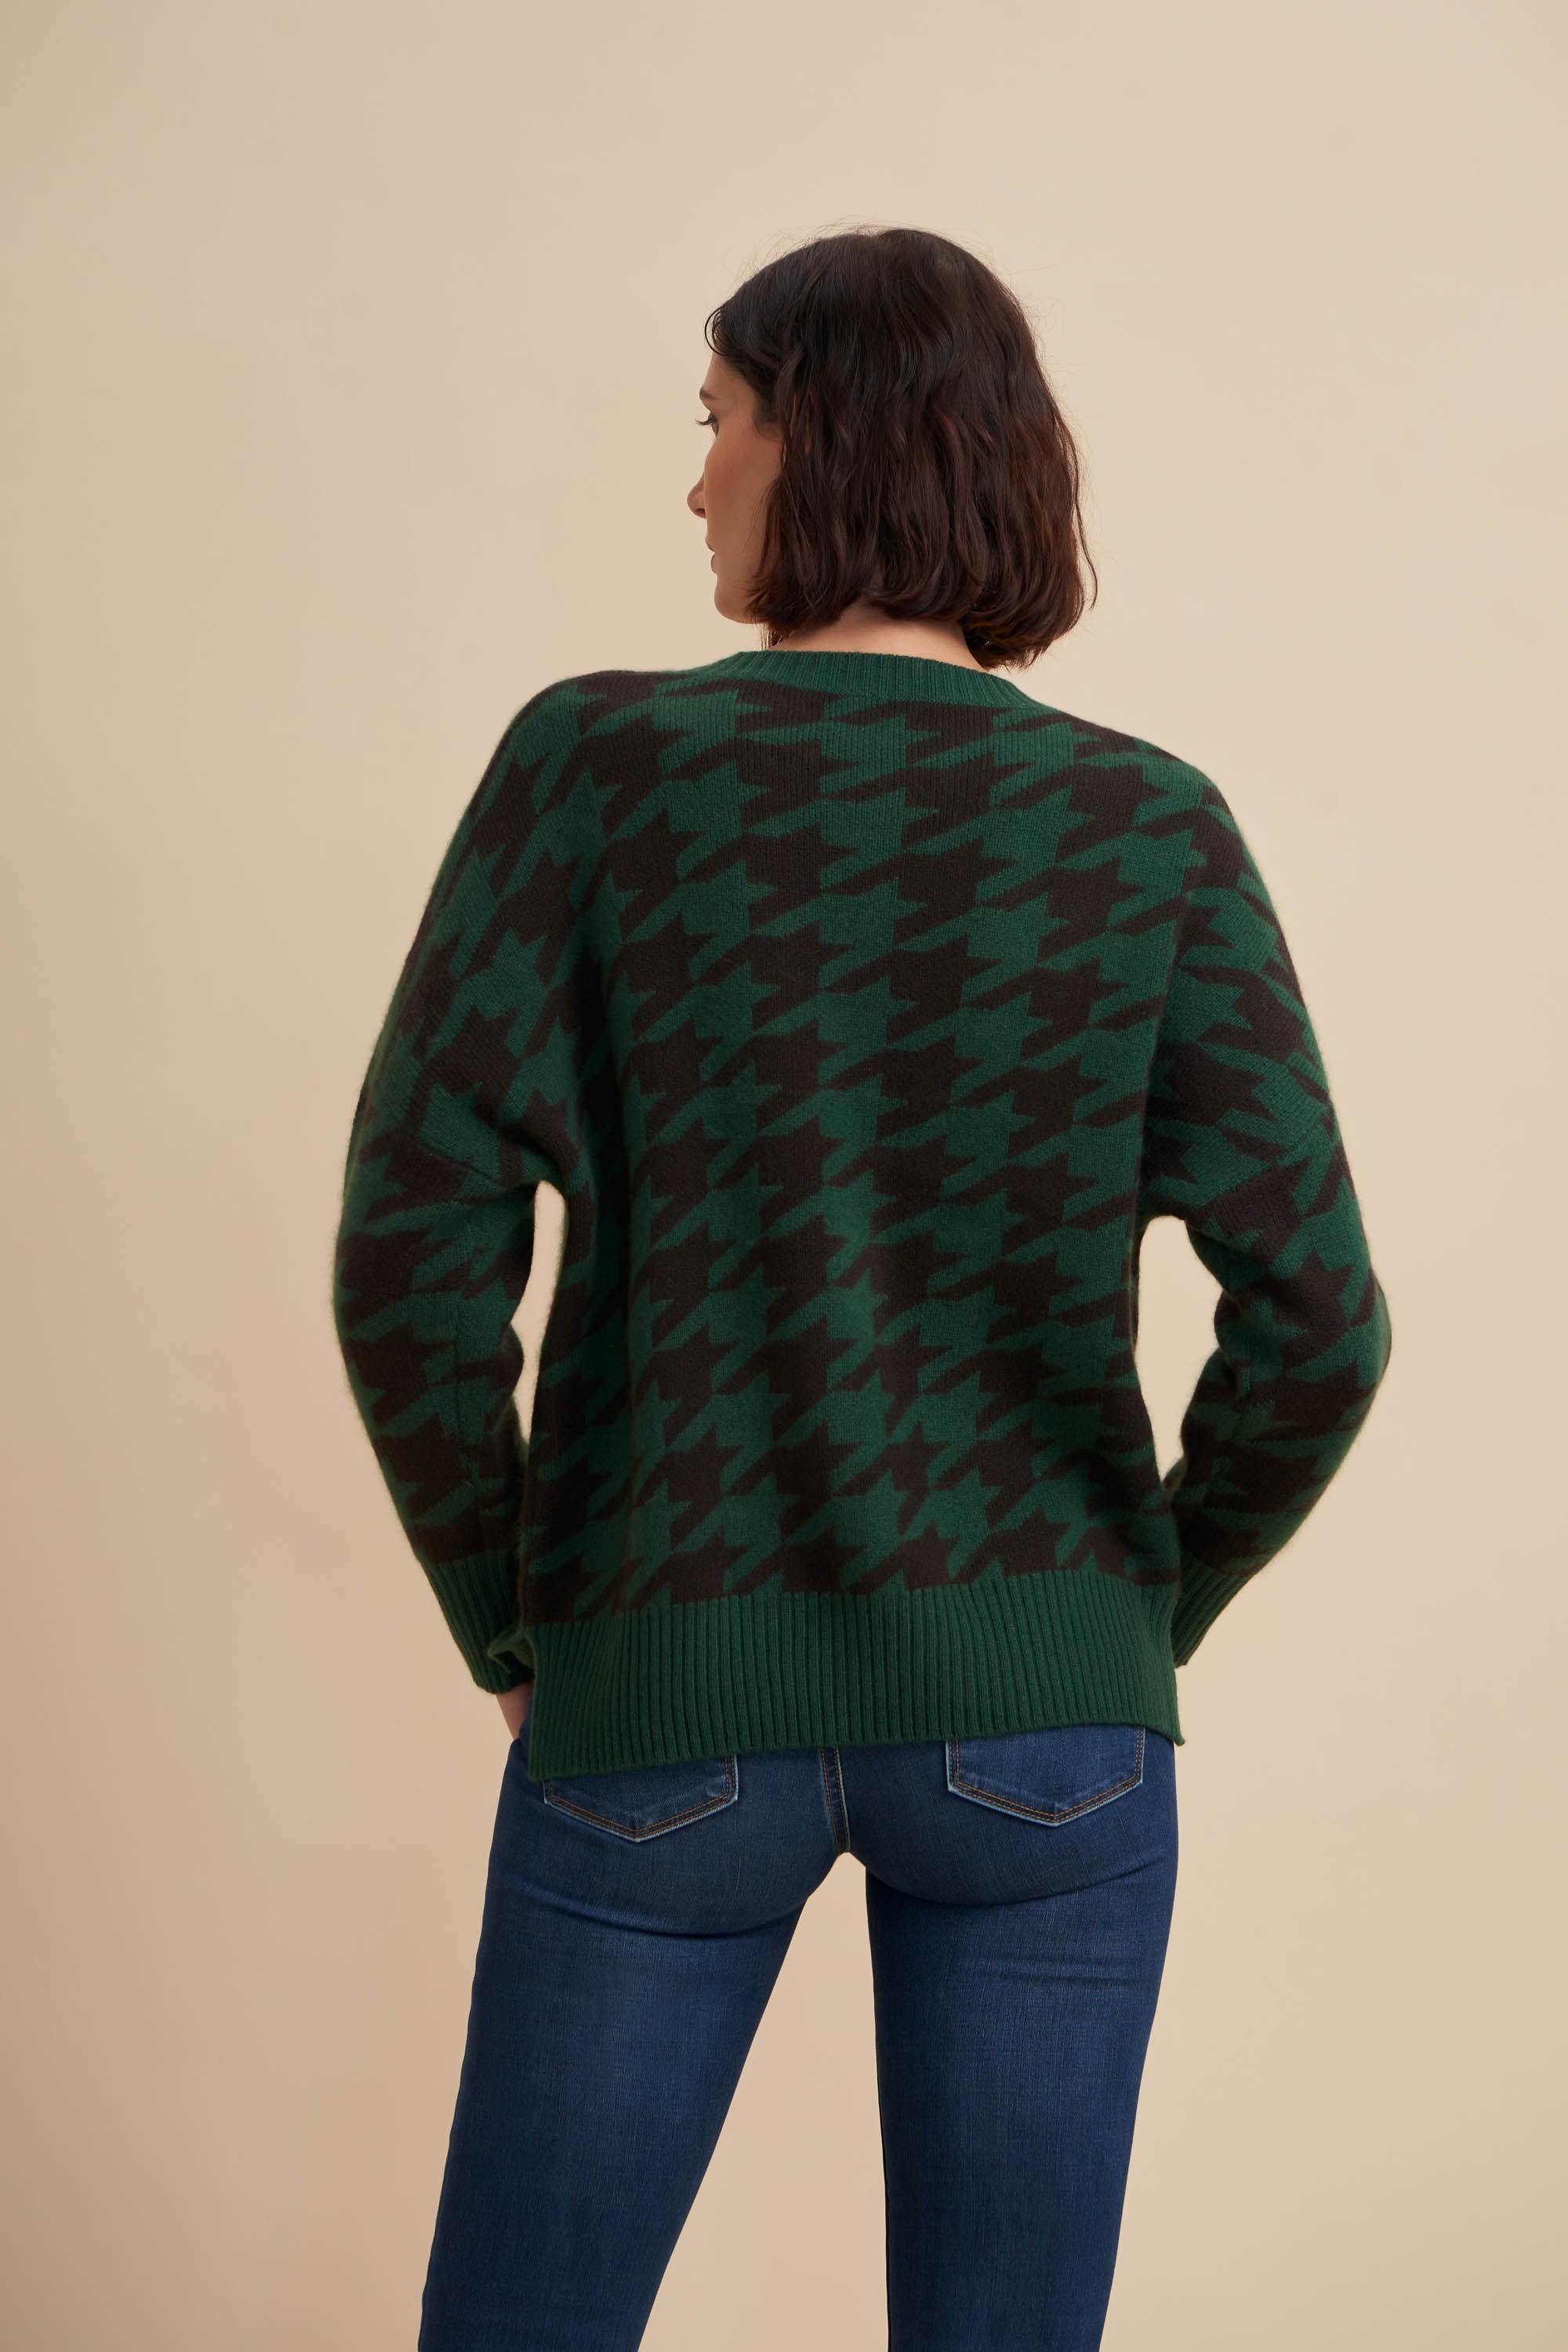 houndstooth sweater, green cashmere sweater, green sweater women, crew neck cashmere sweater, crew neck sweater womens, 70s sweater, retro sweater, vintage sweater